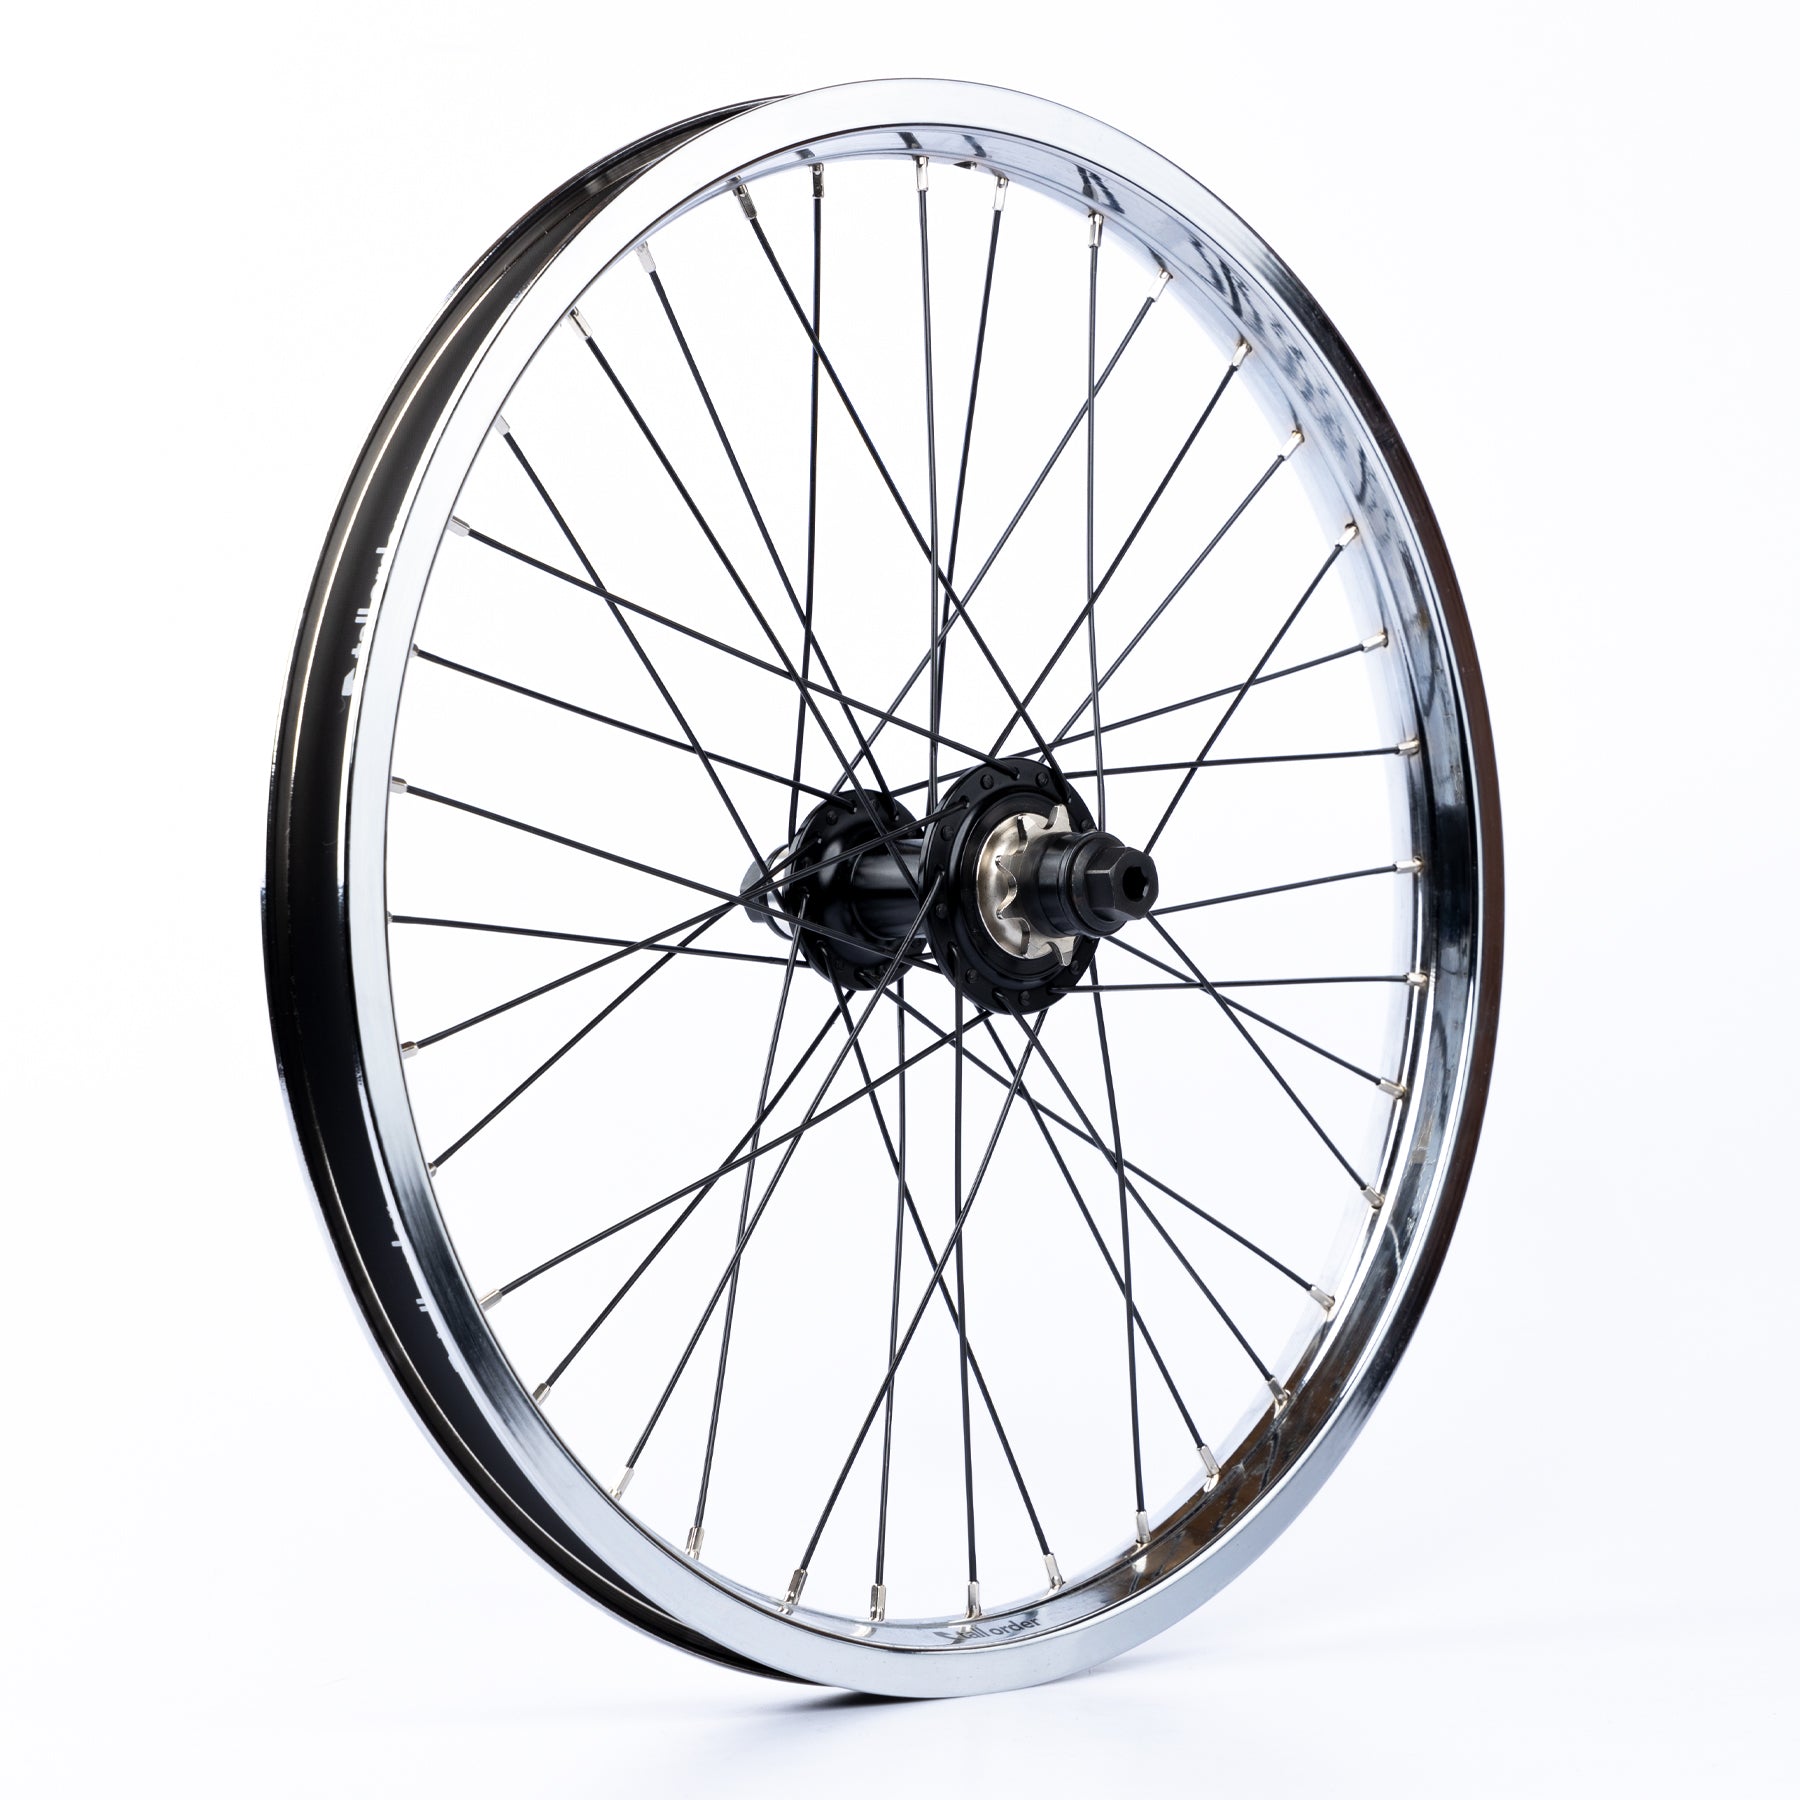 Tall Order Dynamics RHD Casette Wheel - Black With Chrome Rim And Silver Nipples 9 Tooth